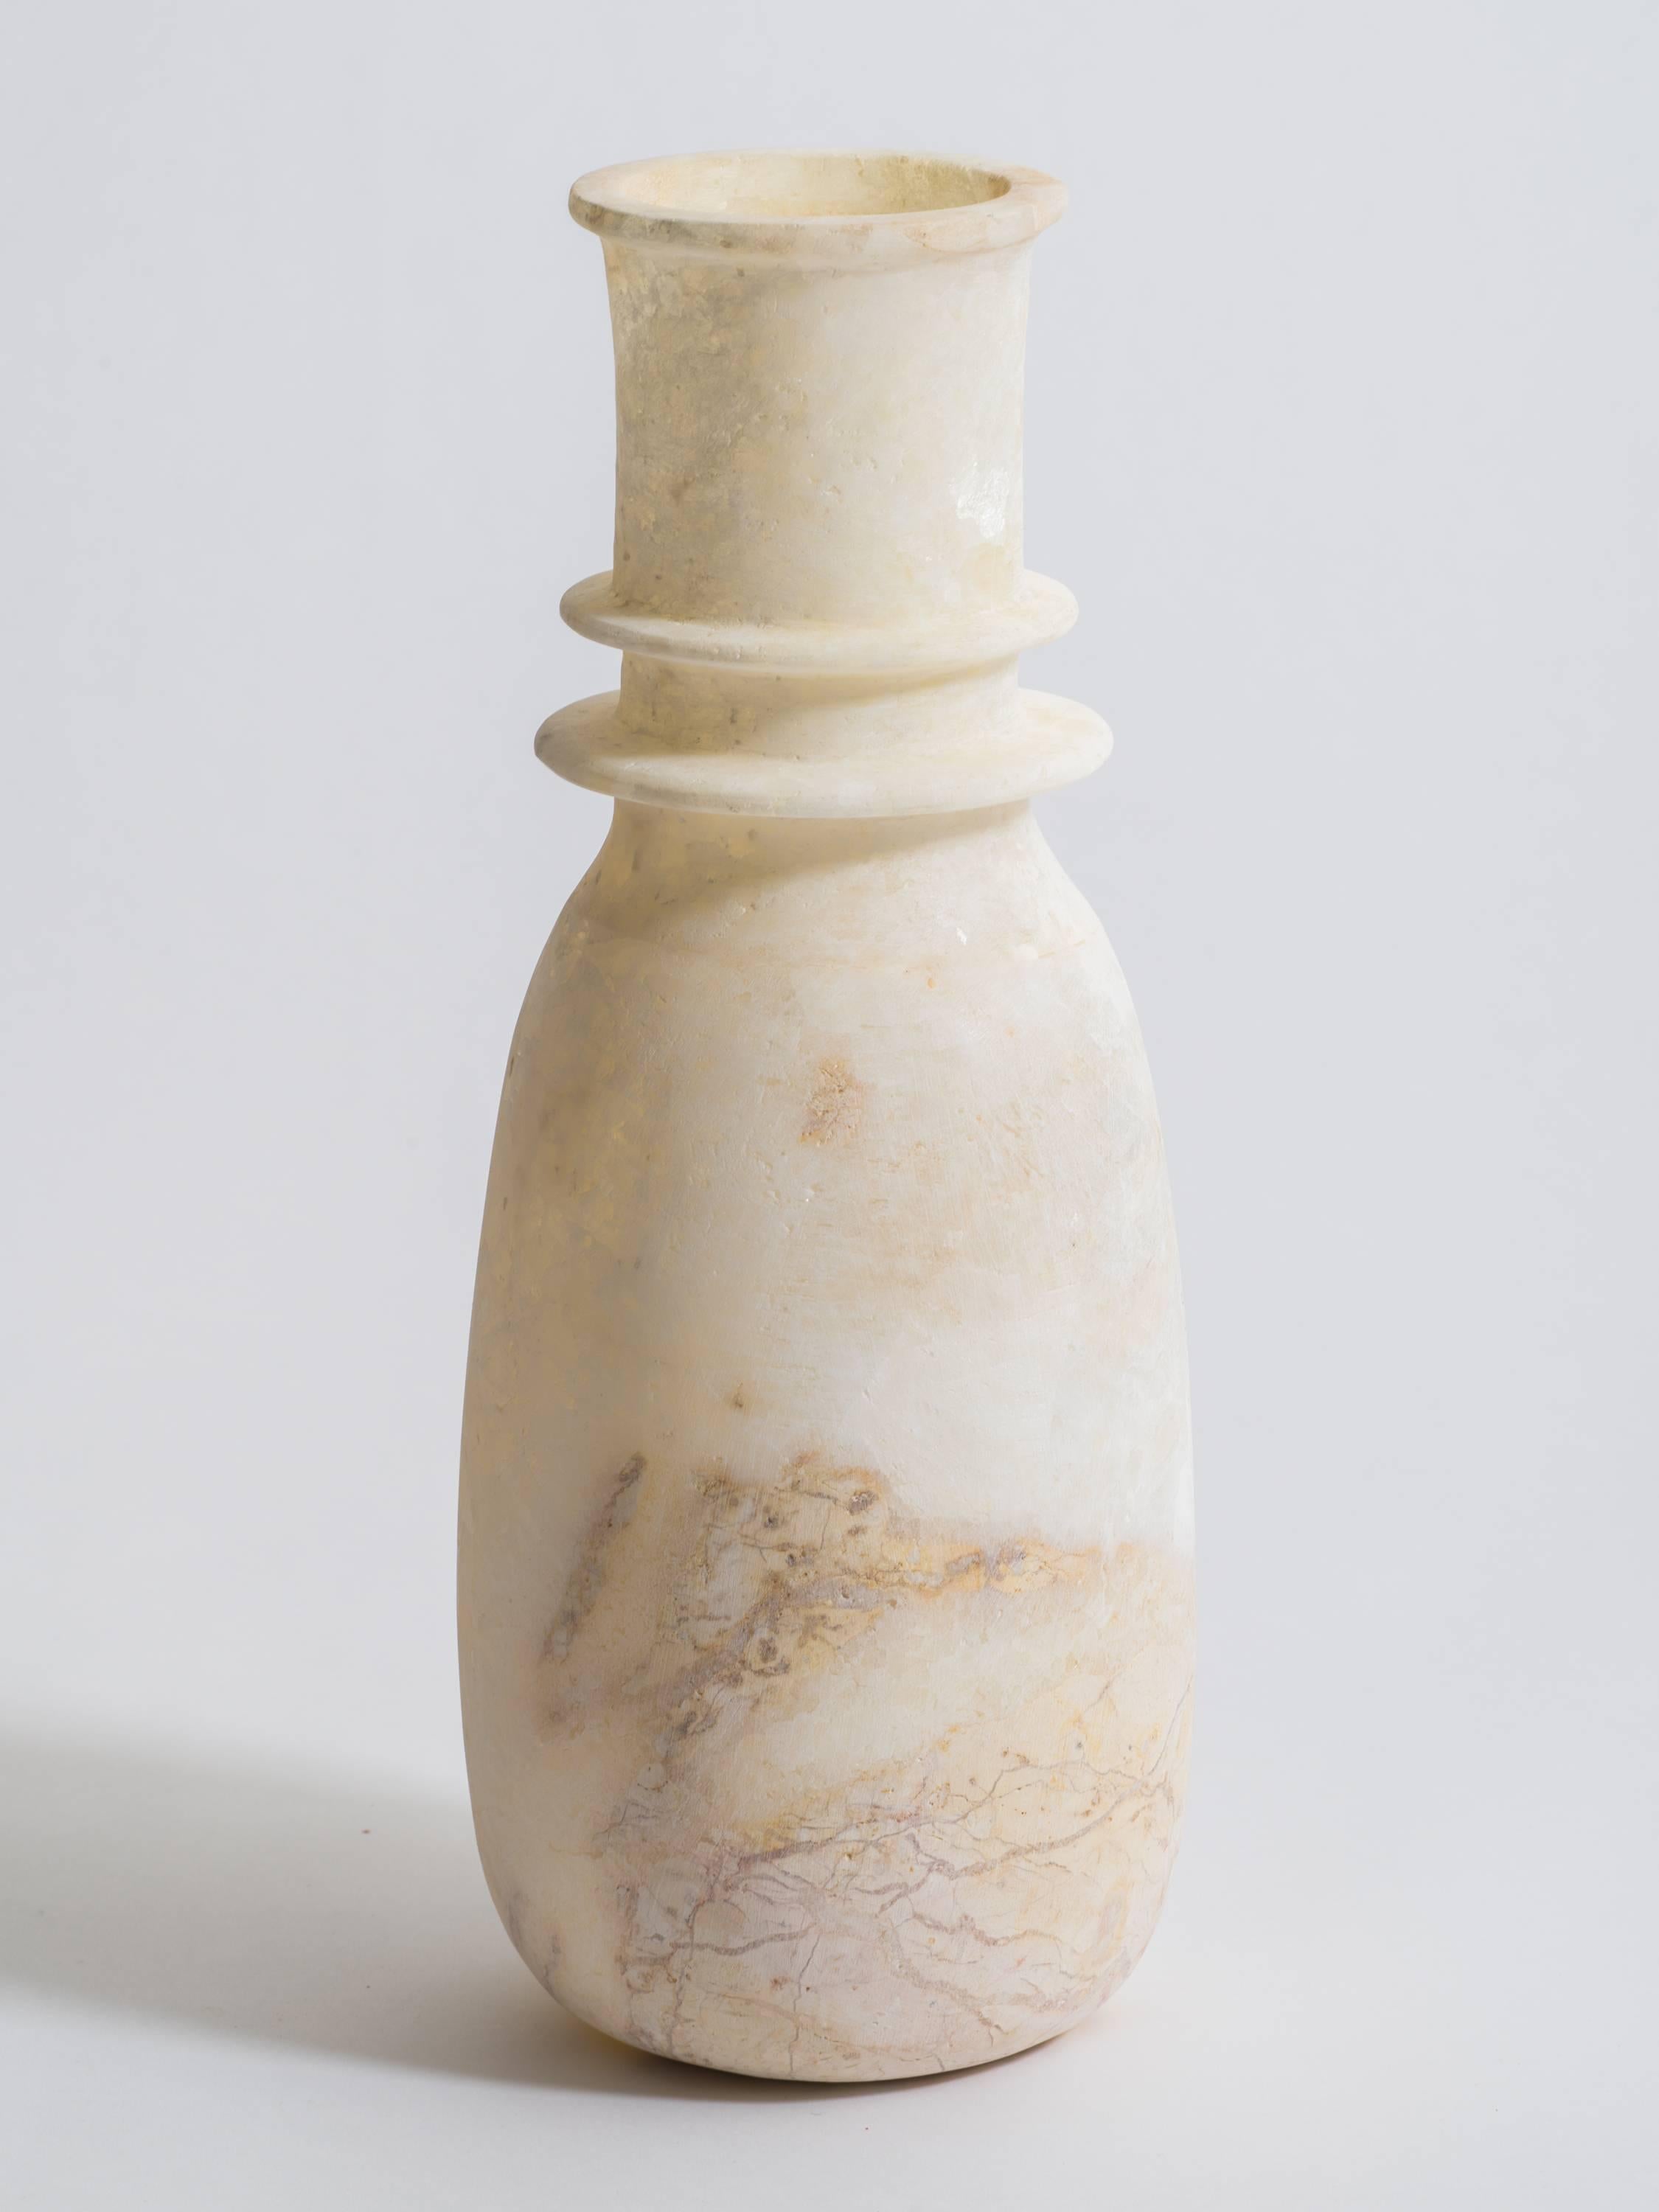 Tall Egyptian hand-carved alabaster ovoid form vase with double rim. Natural gypsum alabaster is milky white with natural veining.